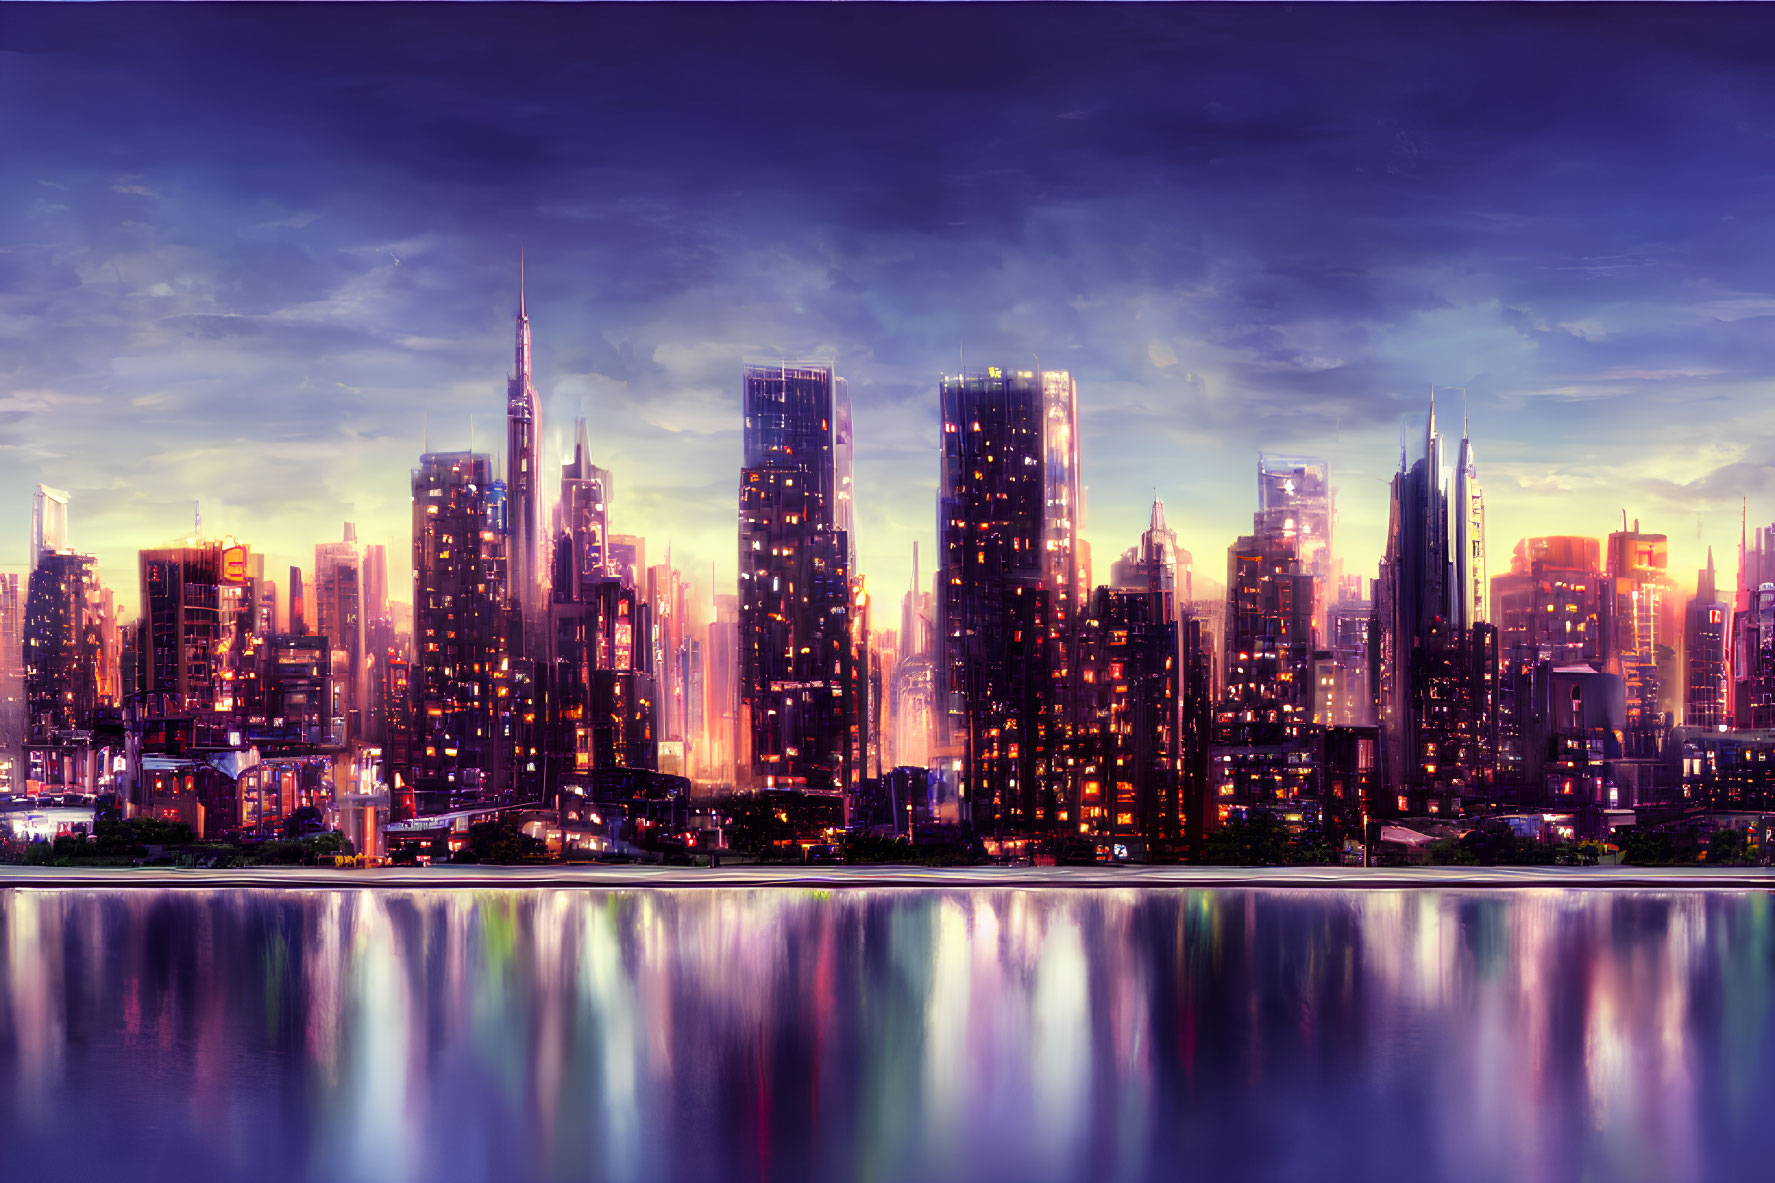 Twilight cityscape with illuminated skyscrapers reflecting on calm water